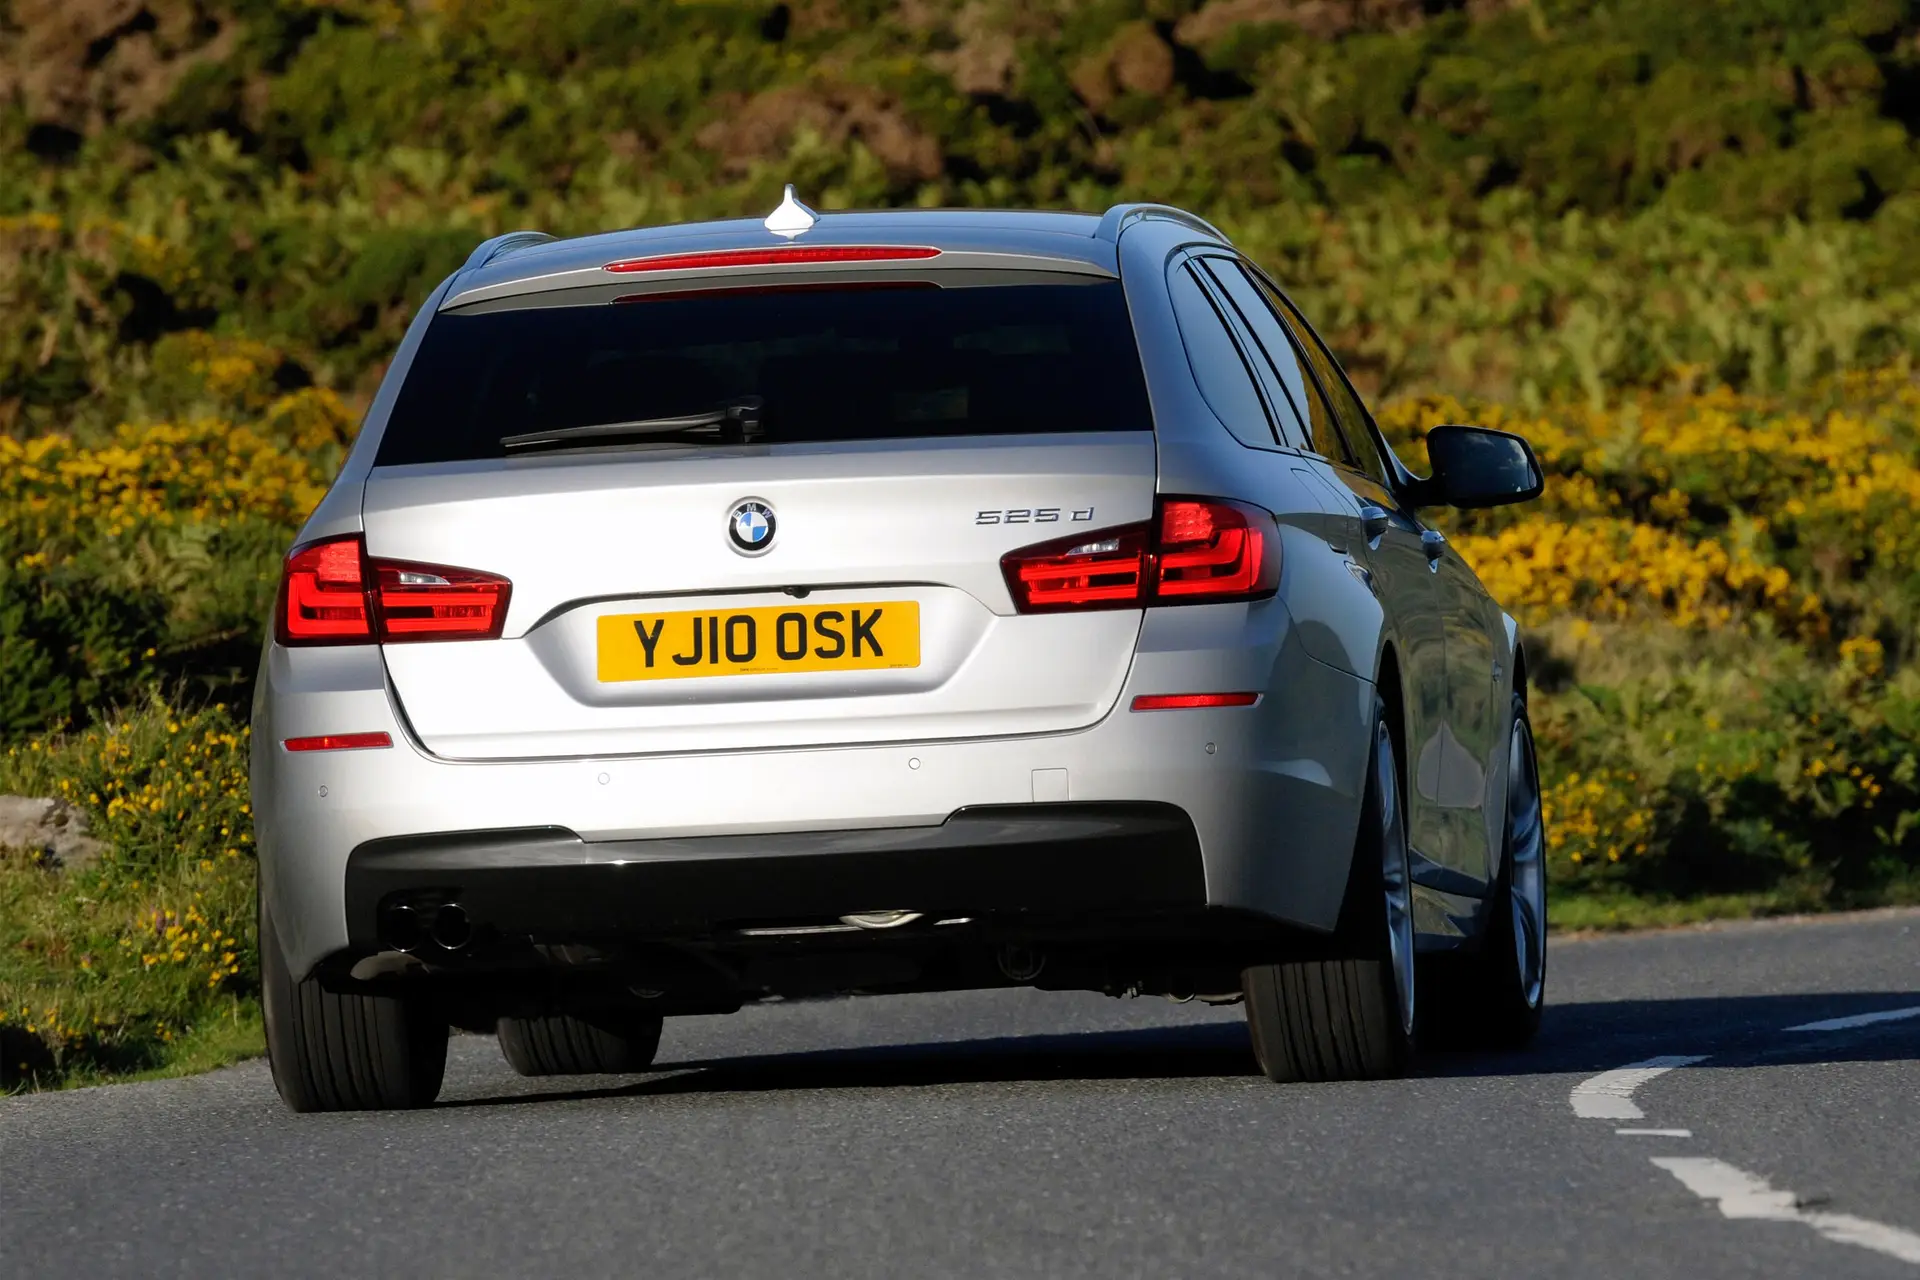 BMW 5 Series Touring (2010-2017) Review: Exterior rear photo of the BMW 5 Series Touring on the road